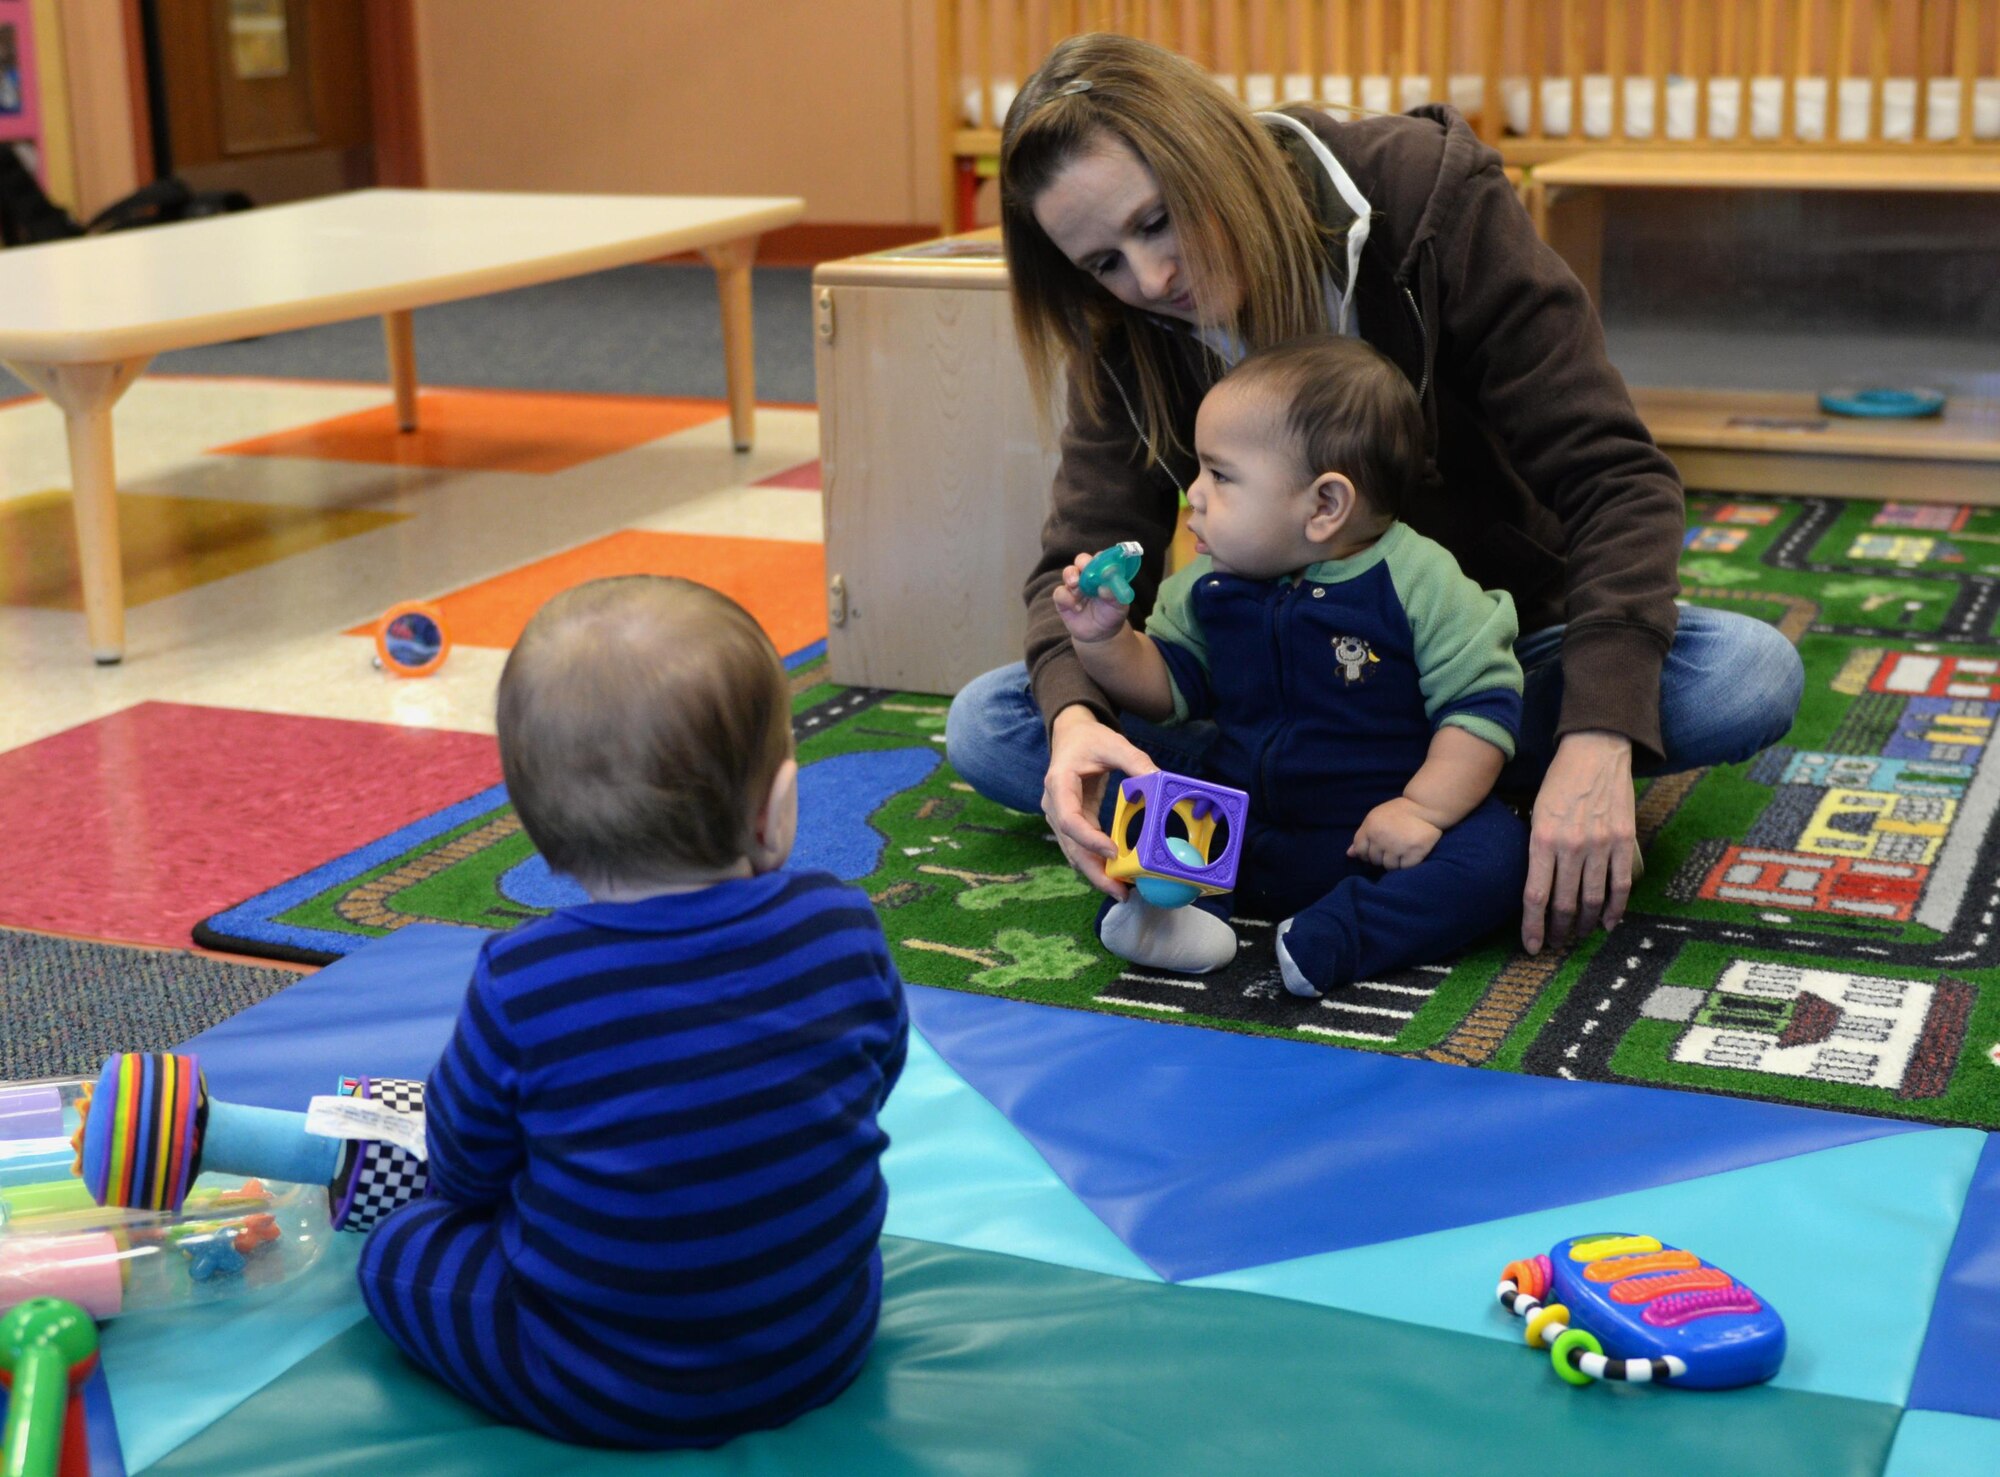 Michelle Caslin, the Child Development Center program lead, interacts with children Jan. 26, 2017, at the CDC on Little Rock Air Force Base, Ark. The CDC’s goal is to support each child's needs and abilities and challenge them to reach their individual potential. (U.S. Air Force photo by Airman 1st Class Codie Collins)